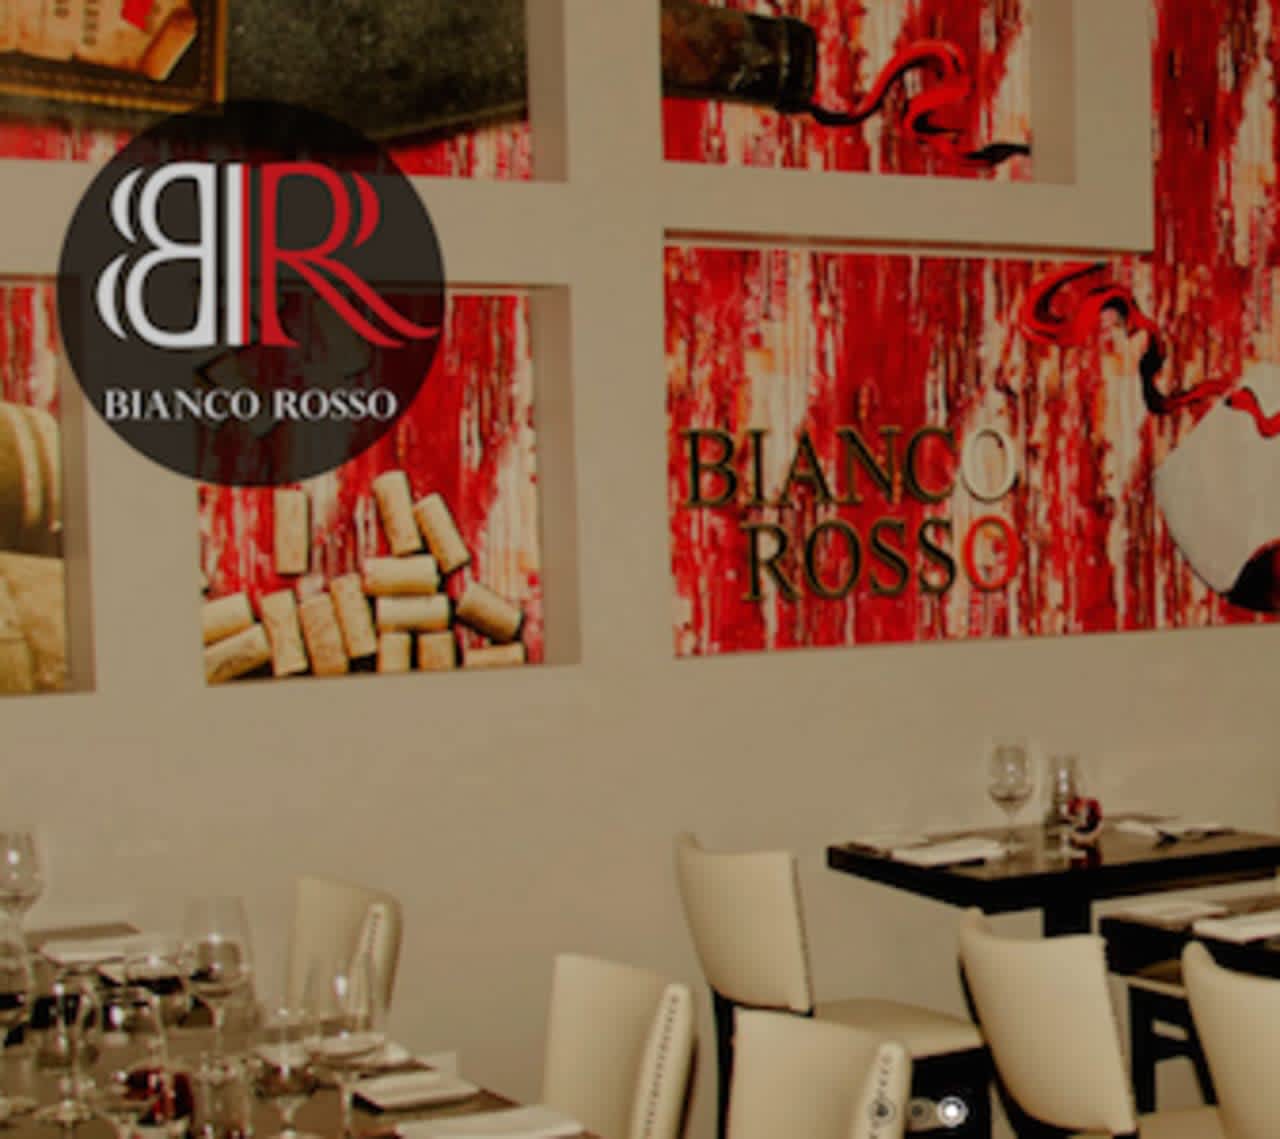 Bianco Rosso is participating in Wilton Restaurant Week.